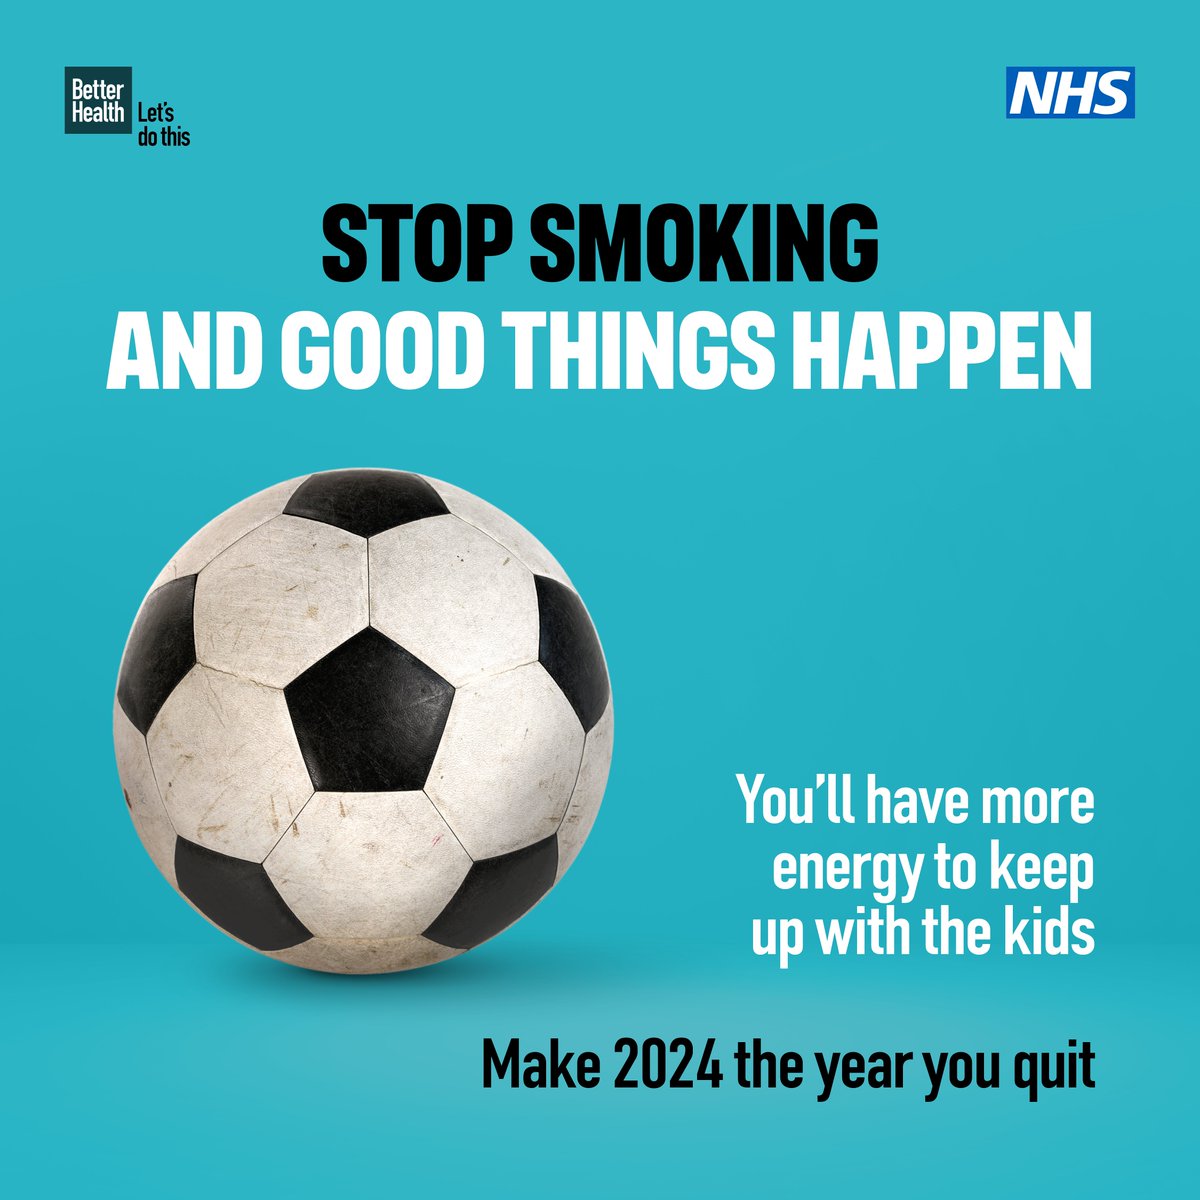 When you stop smoking, good things start to happen! Make 2024 the year you quit smoking for good! nhs.uk/better-health/…